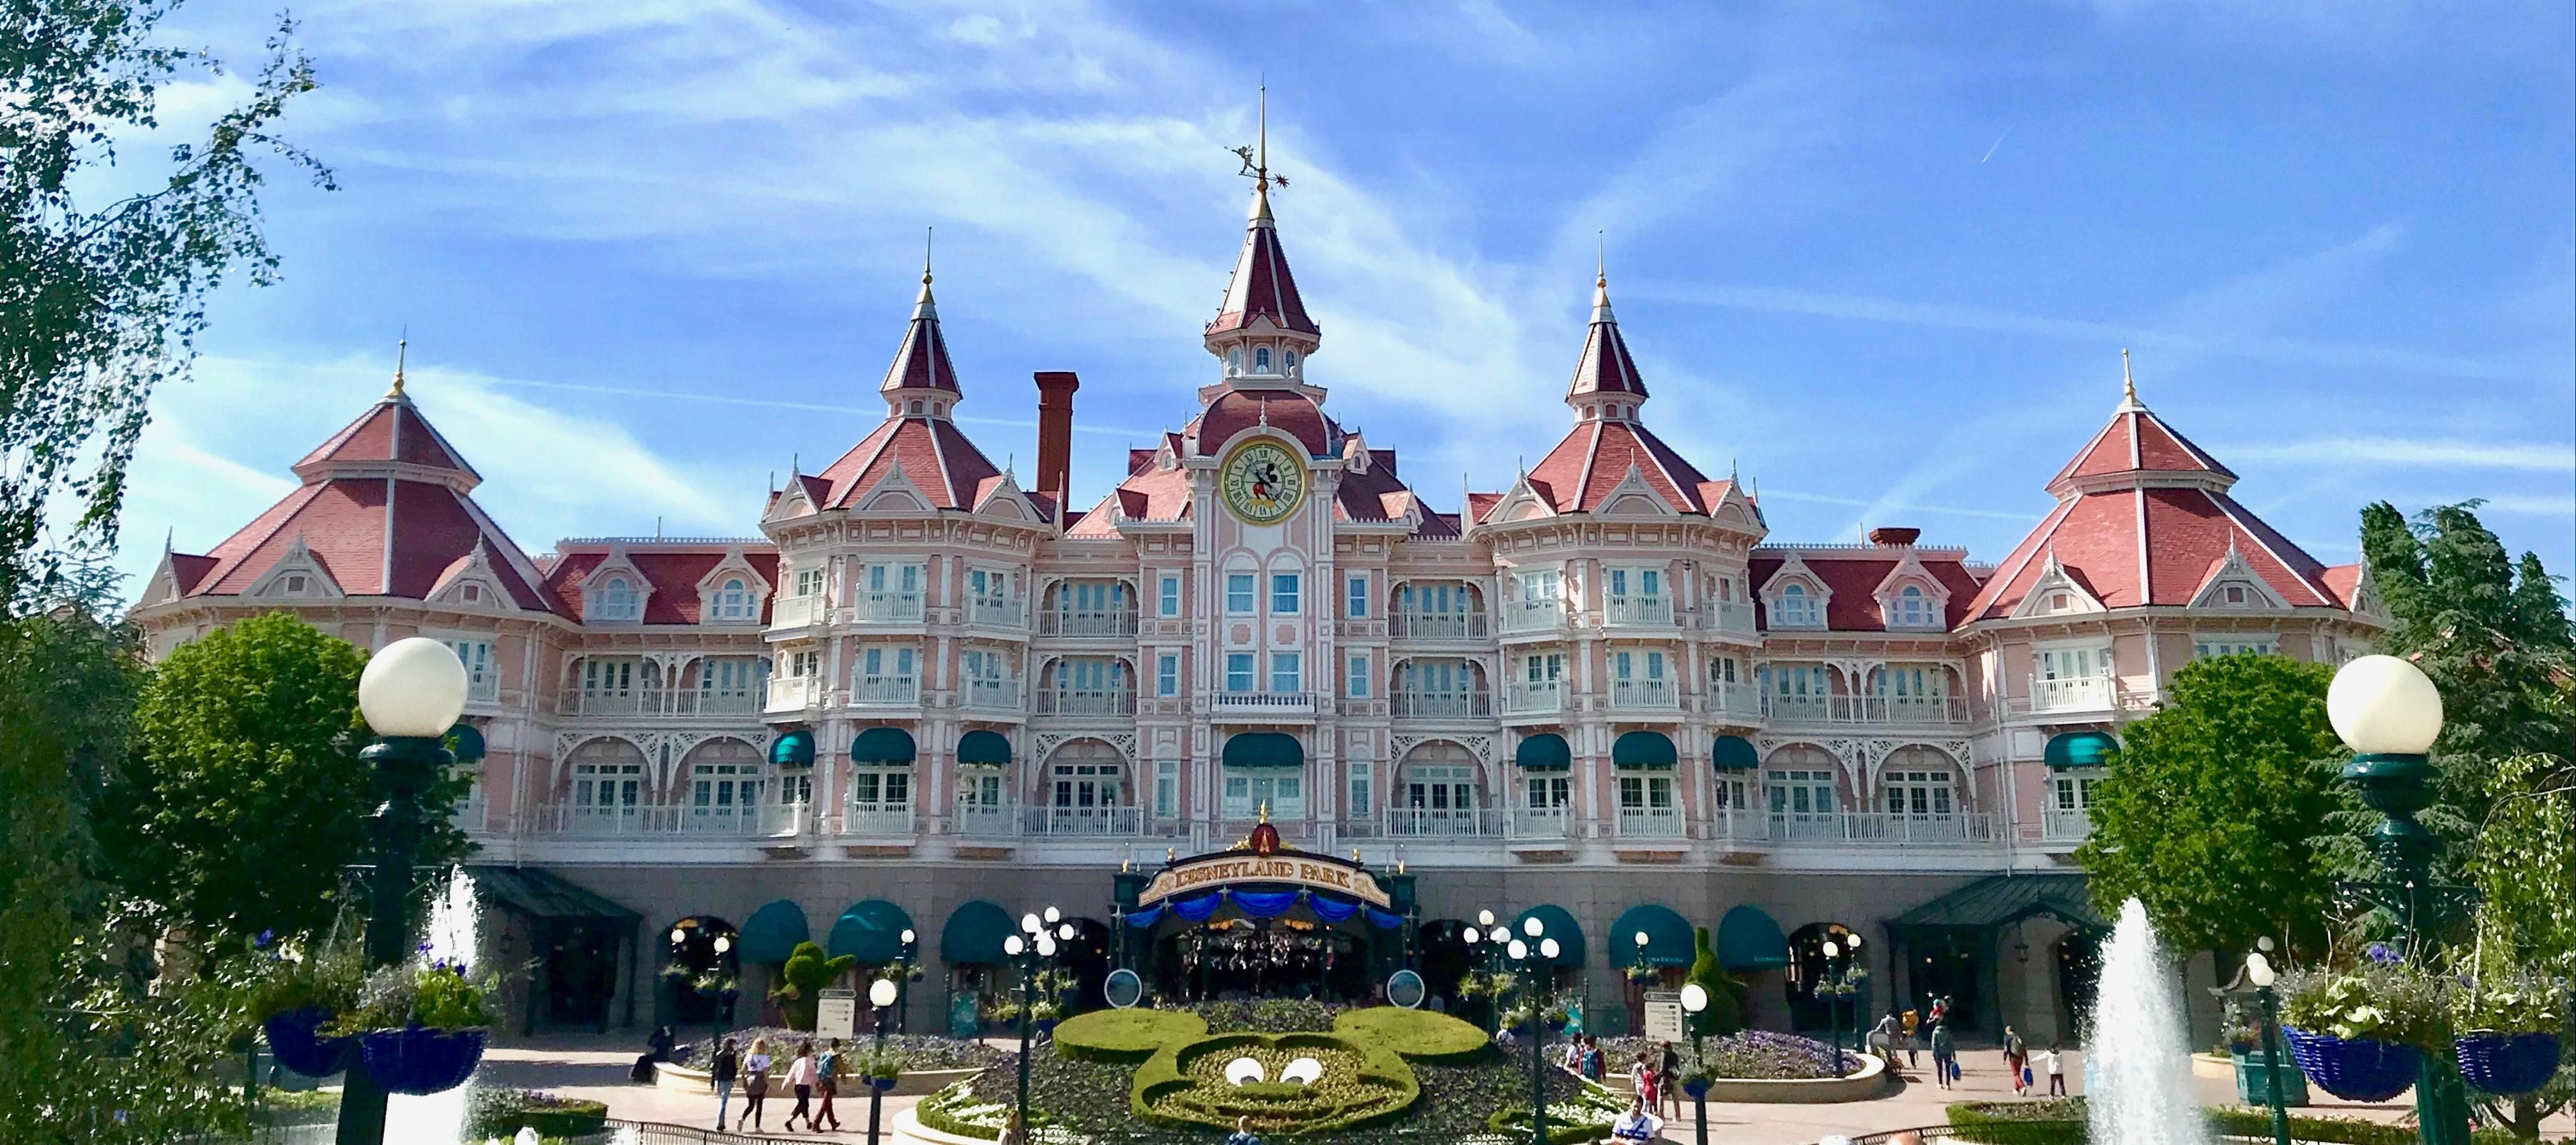 Where to Stay in Disneyland Paris: A Look at the 5 Best Hotels